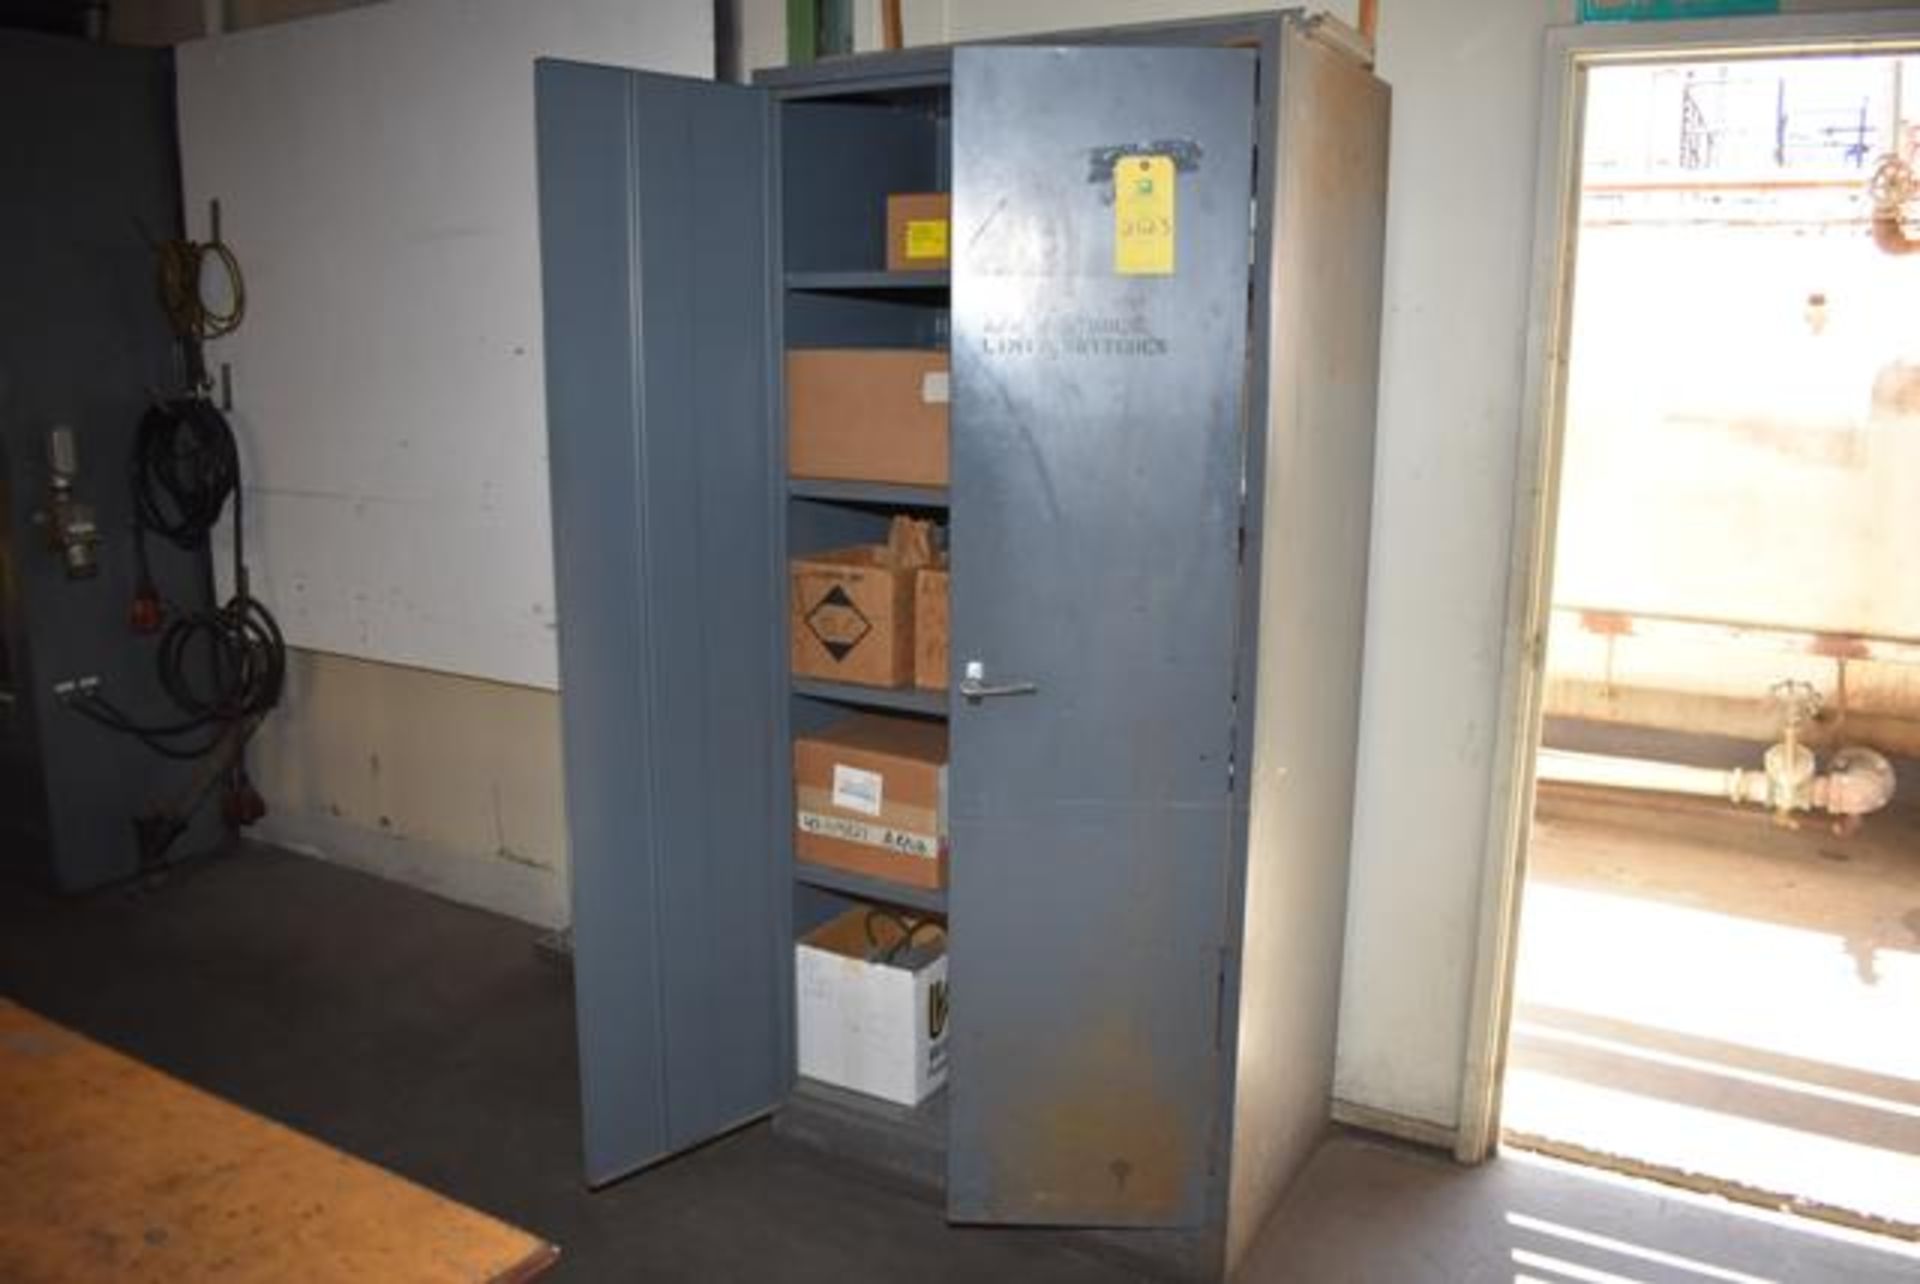 2-Door Cabinet w/Contents, Electrical Supplies, Starters, Square D Components, RIGGING FEE: $100